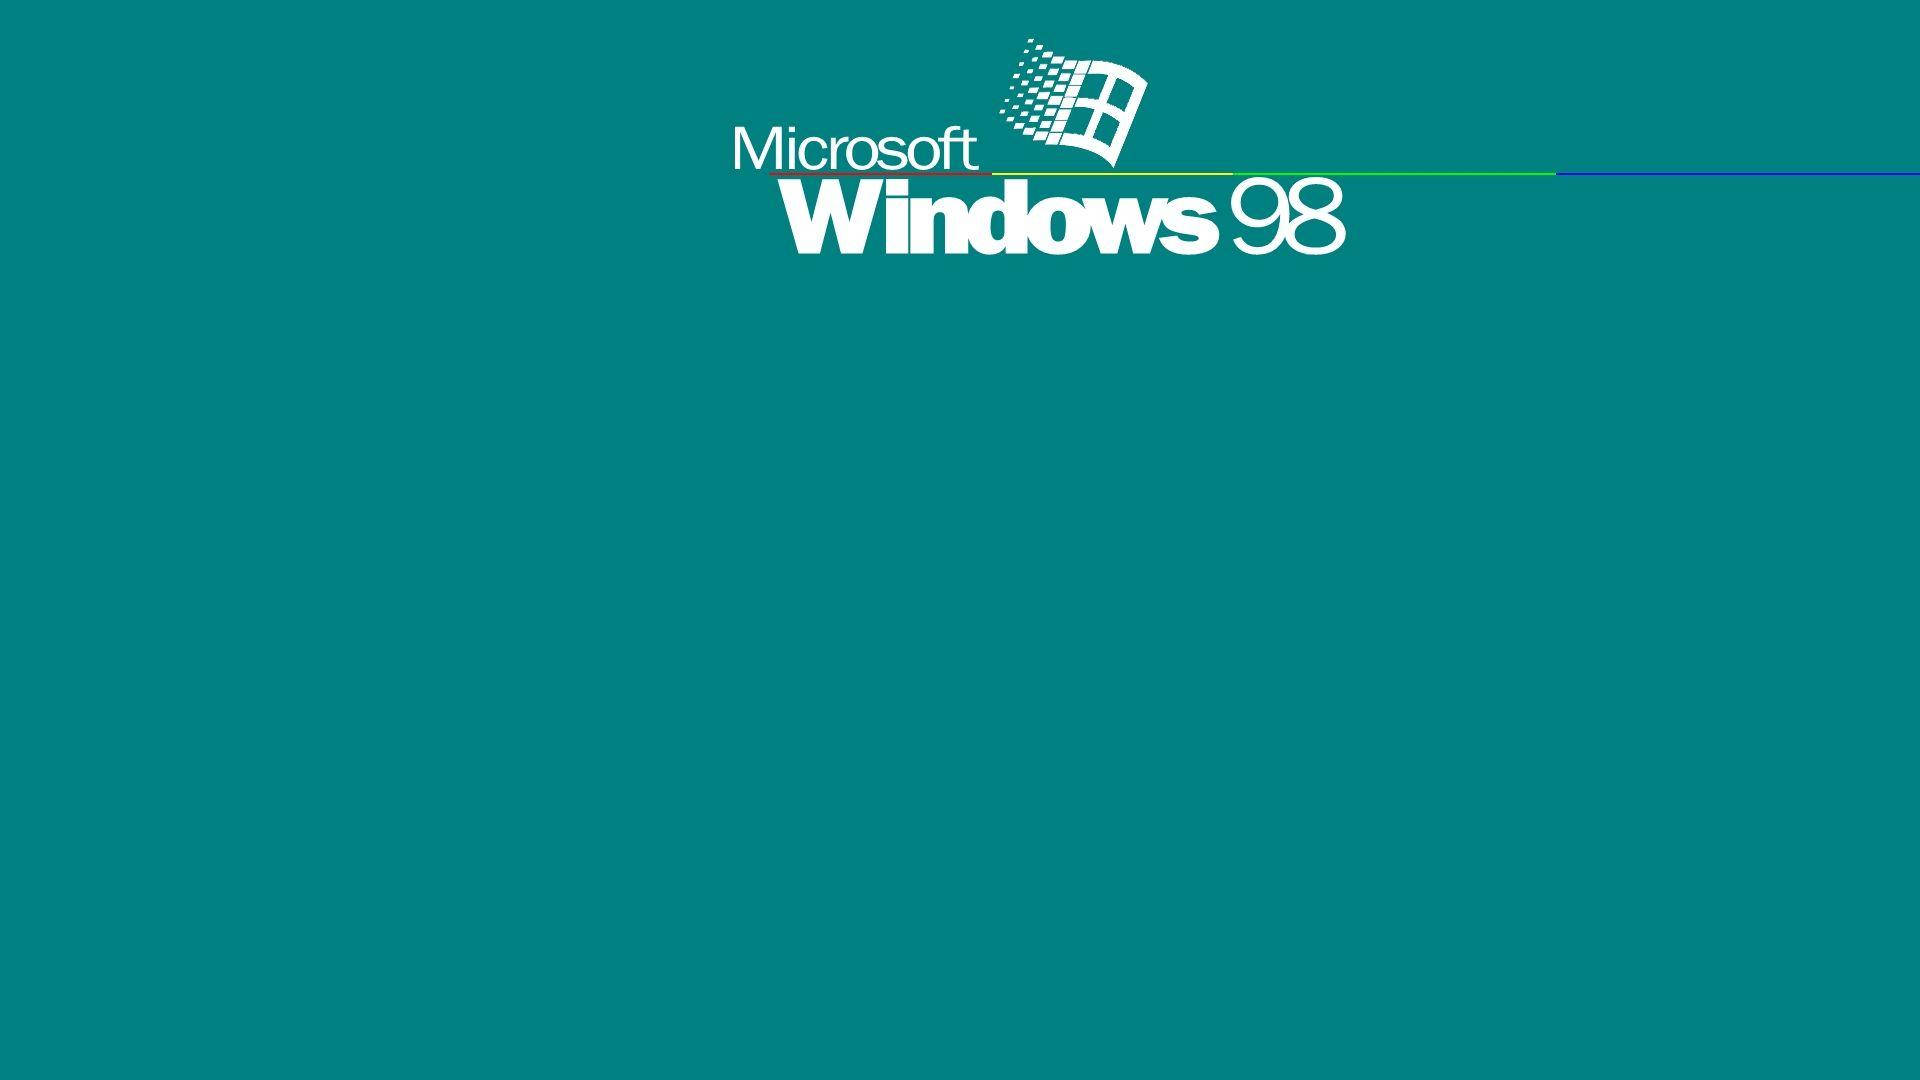 Remembering Good Old Times with Windows 98 Wallpaper